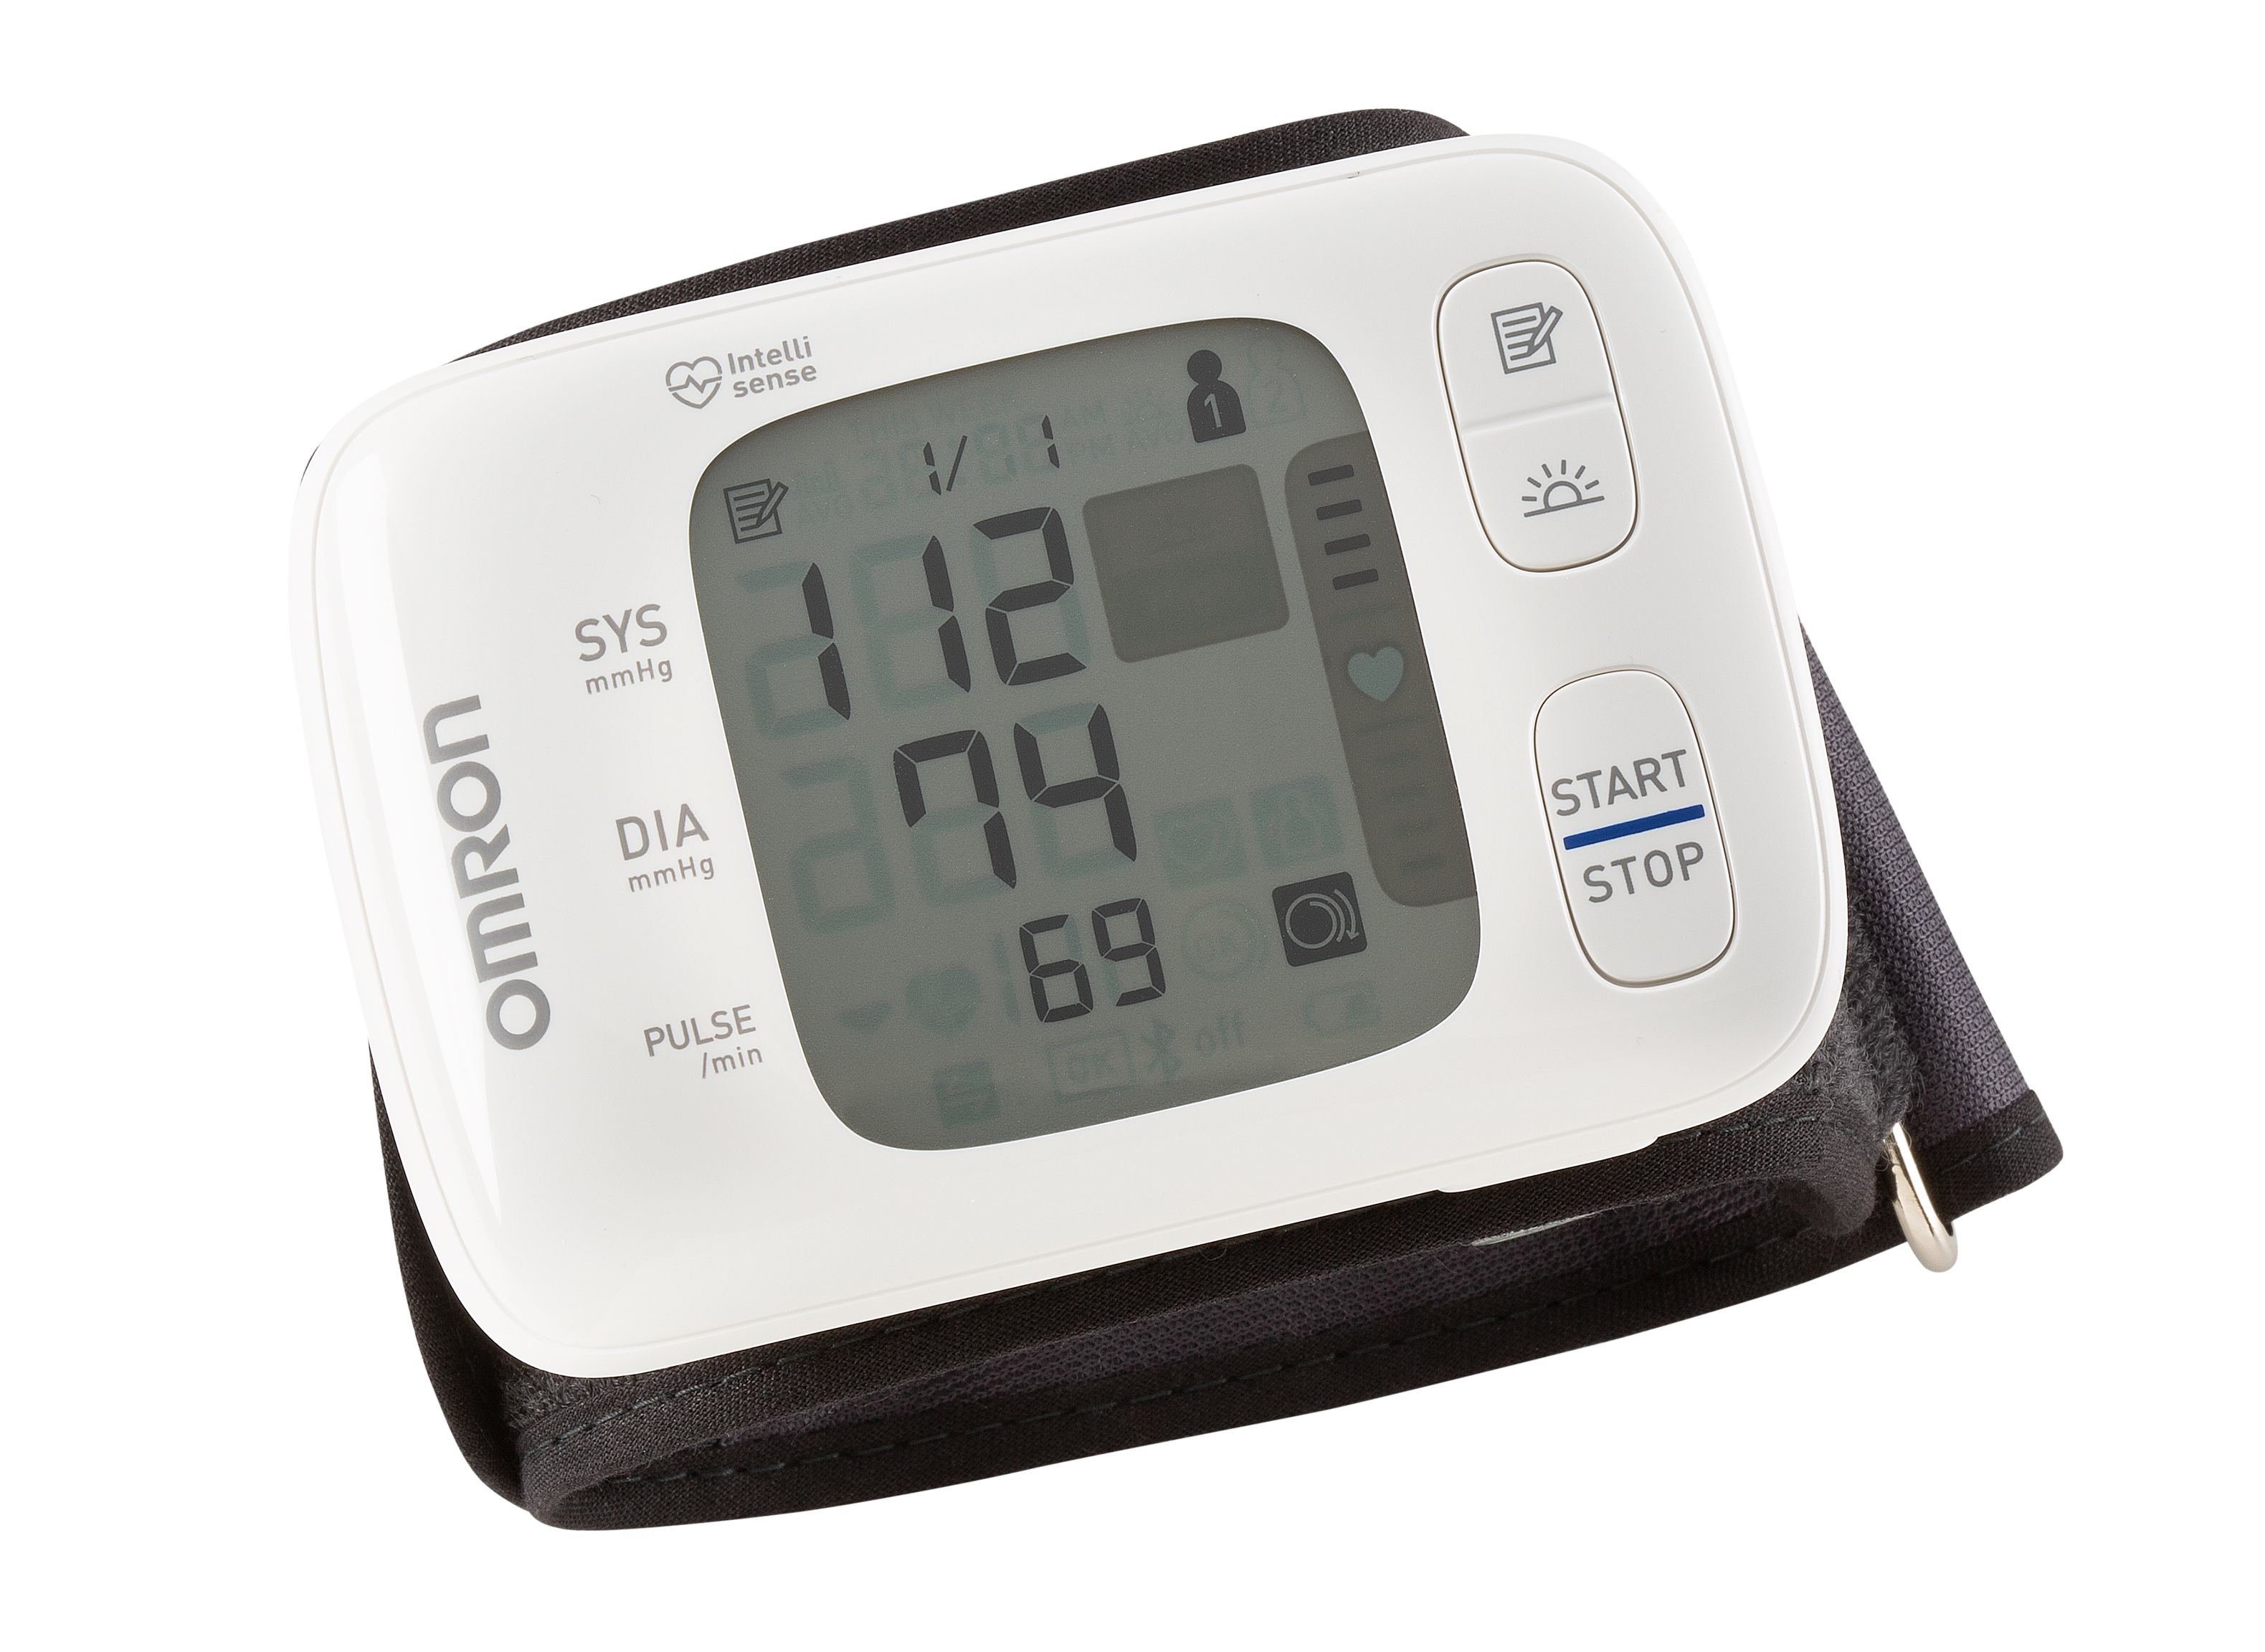 Omron Gold BP4350 () Blood Pressure Monitor Review - Consumer Reports